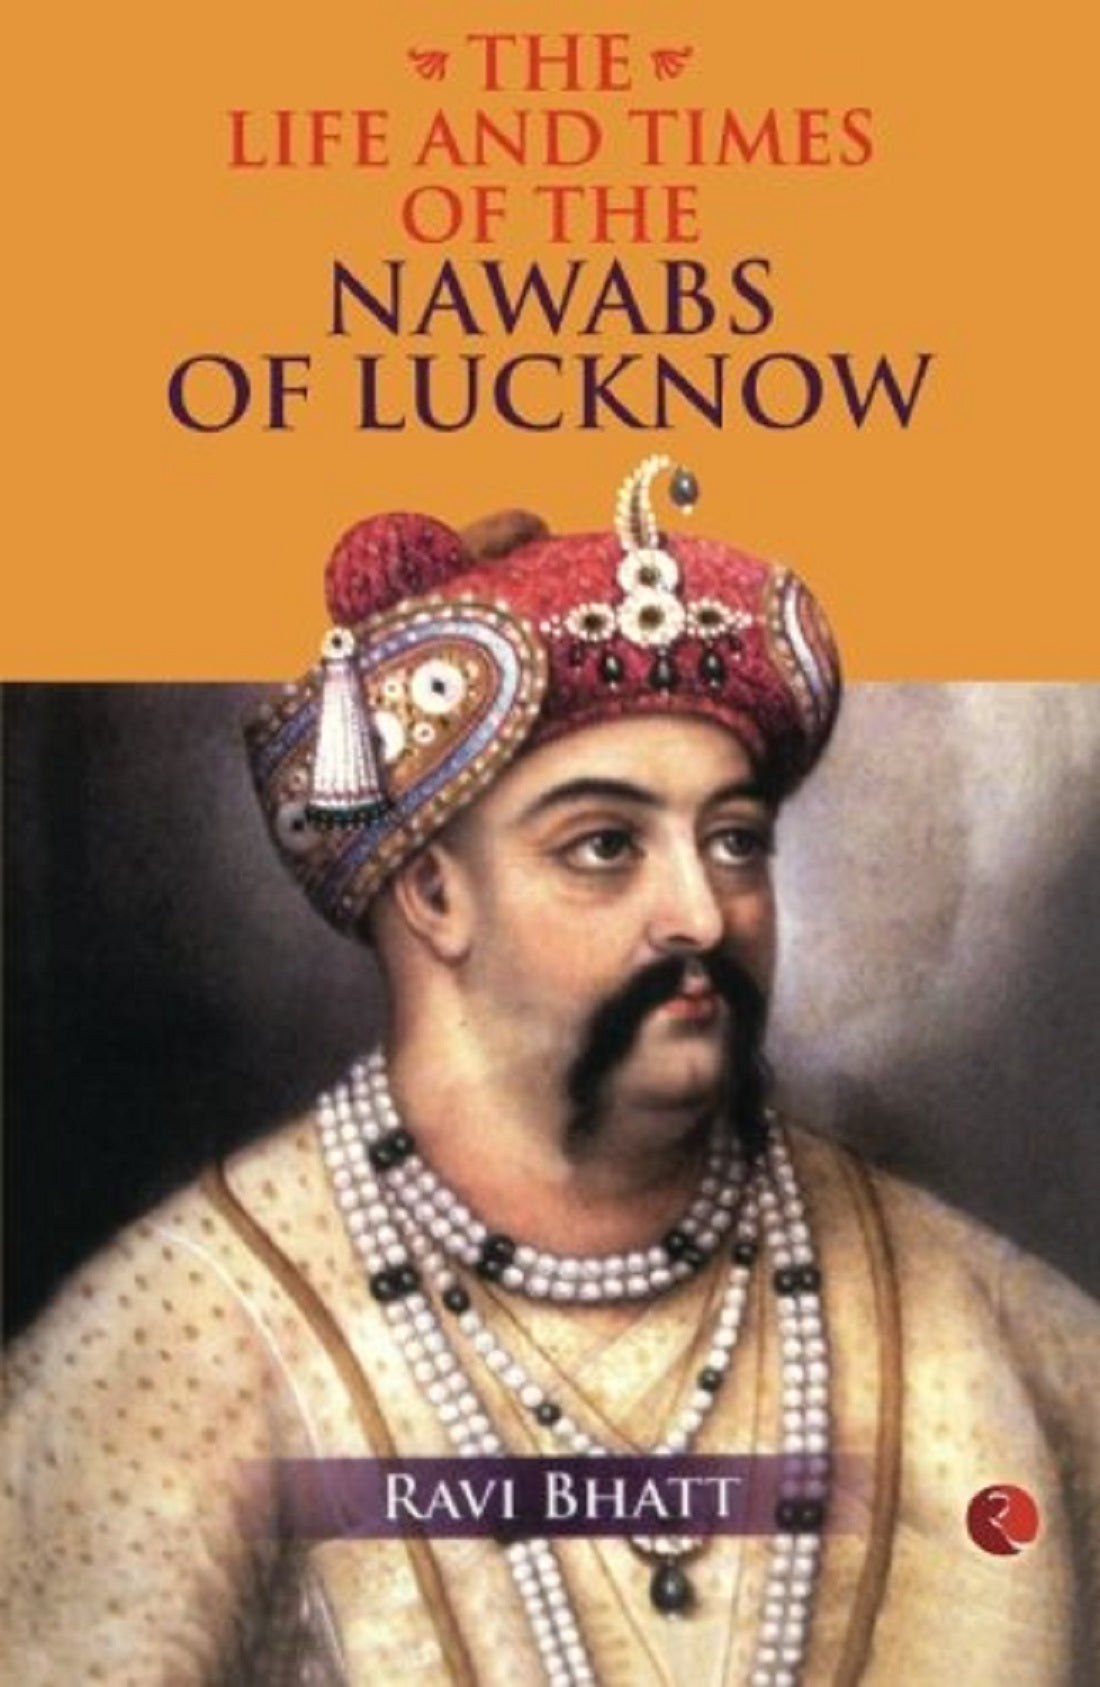 THE LIFE AND TIMES OF THE NAWABS OF LUCKNOW